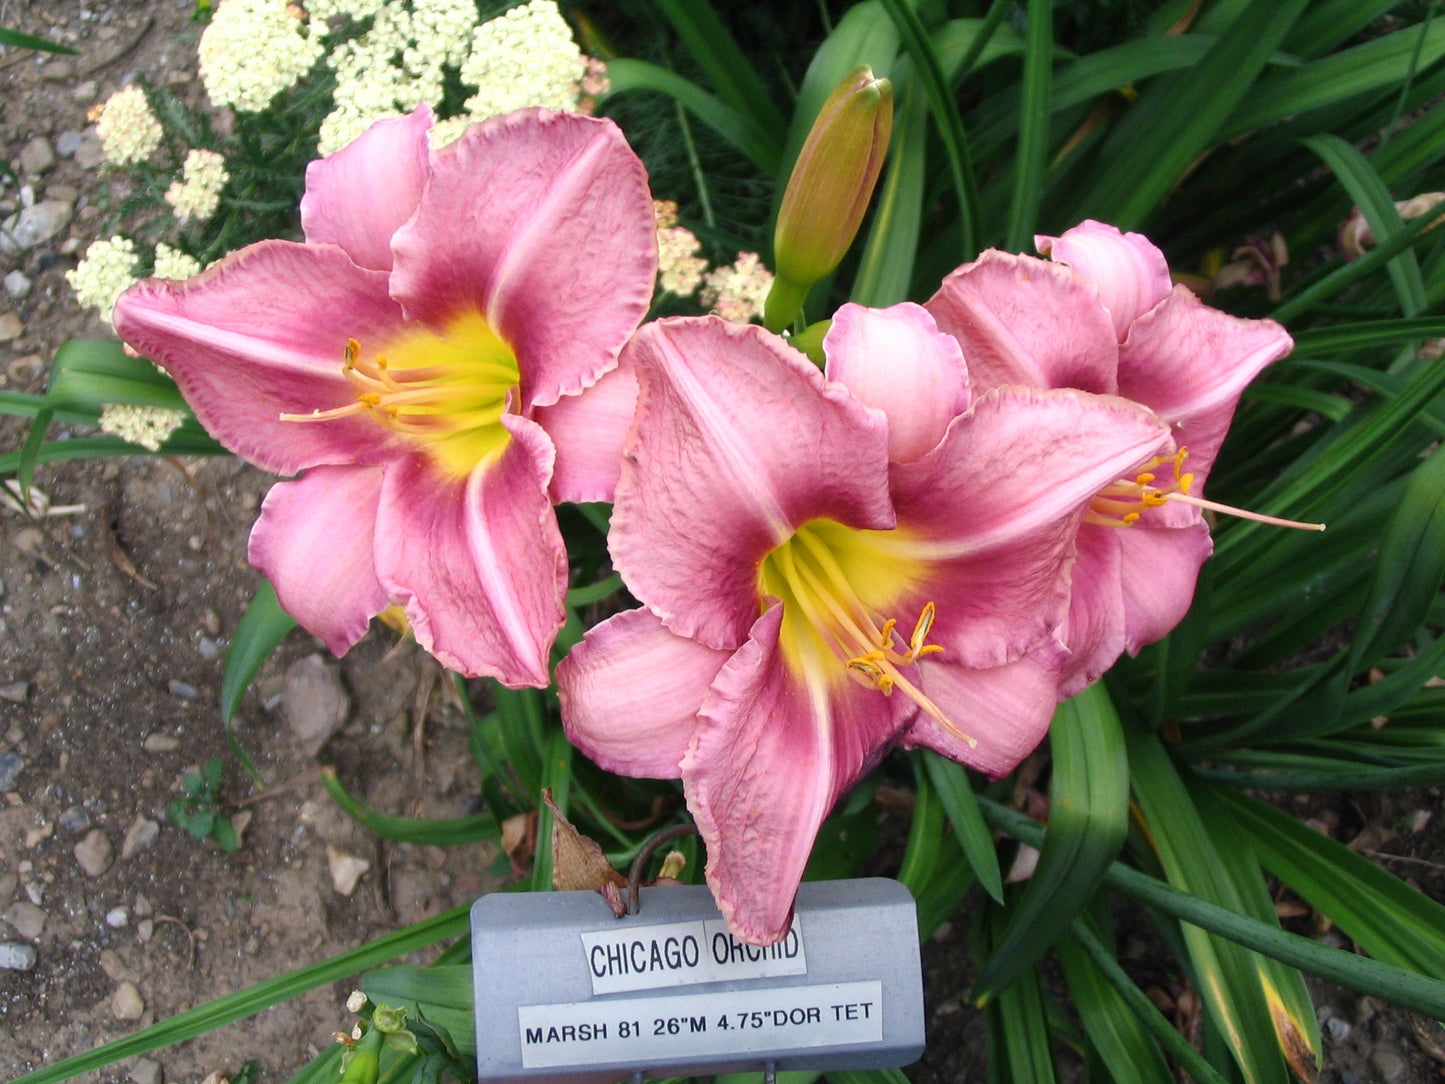 CHICAGO ORCHID